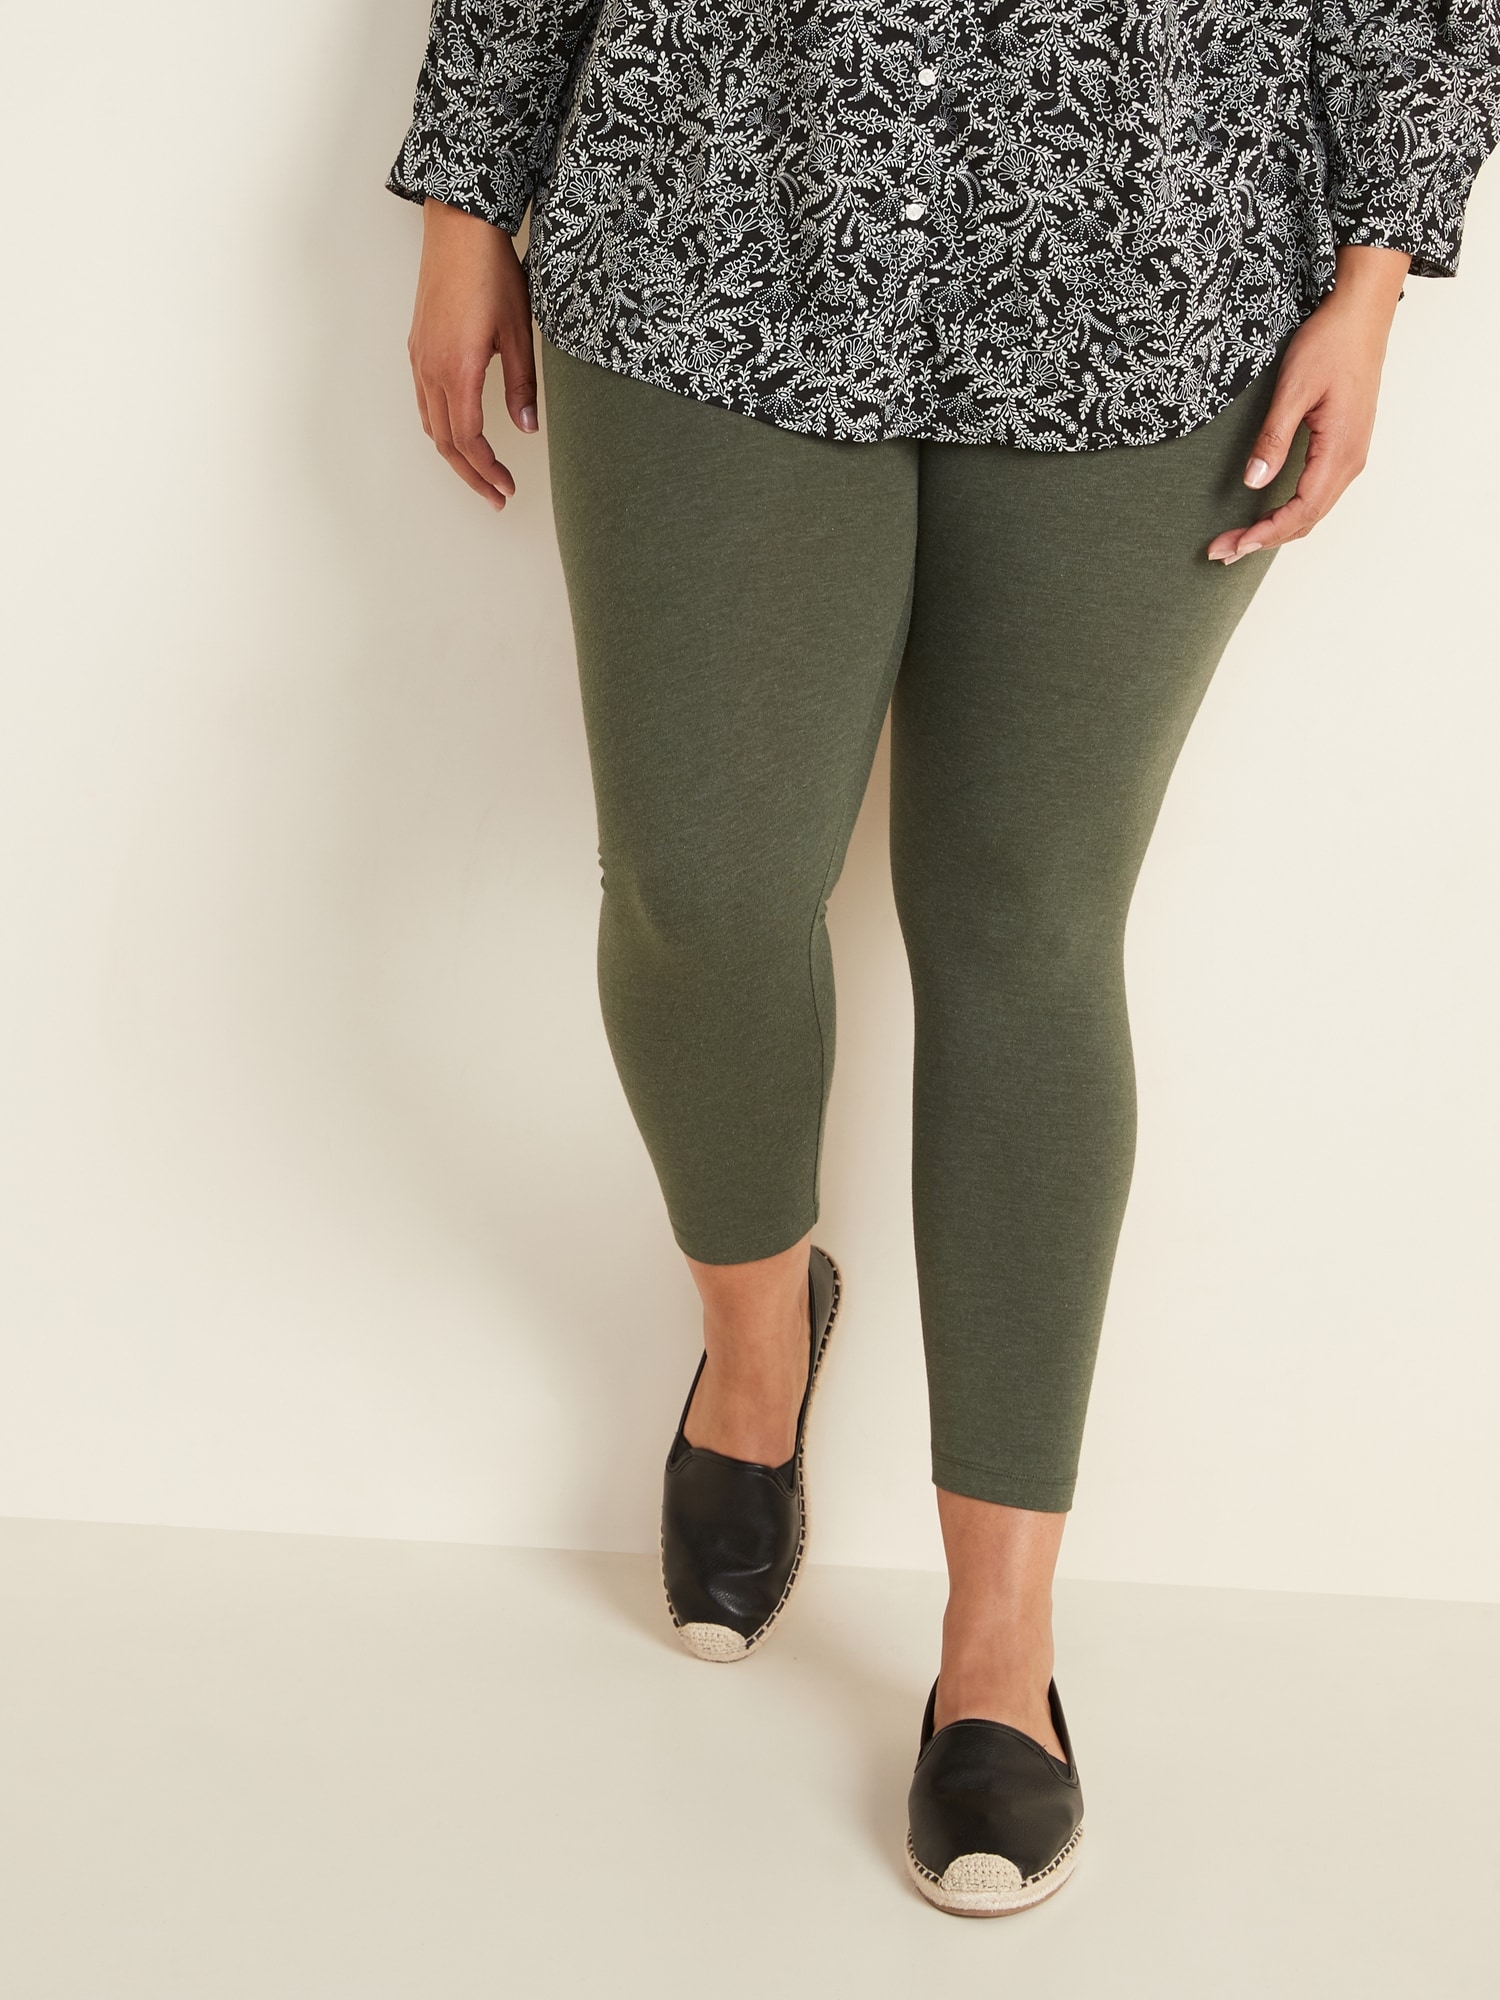  Stretch Is Comfort Girls Cotton Leggings Olive